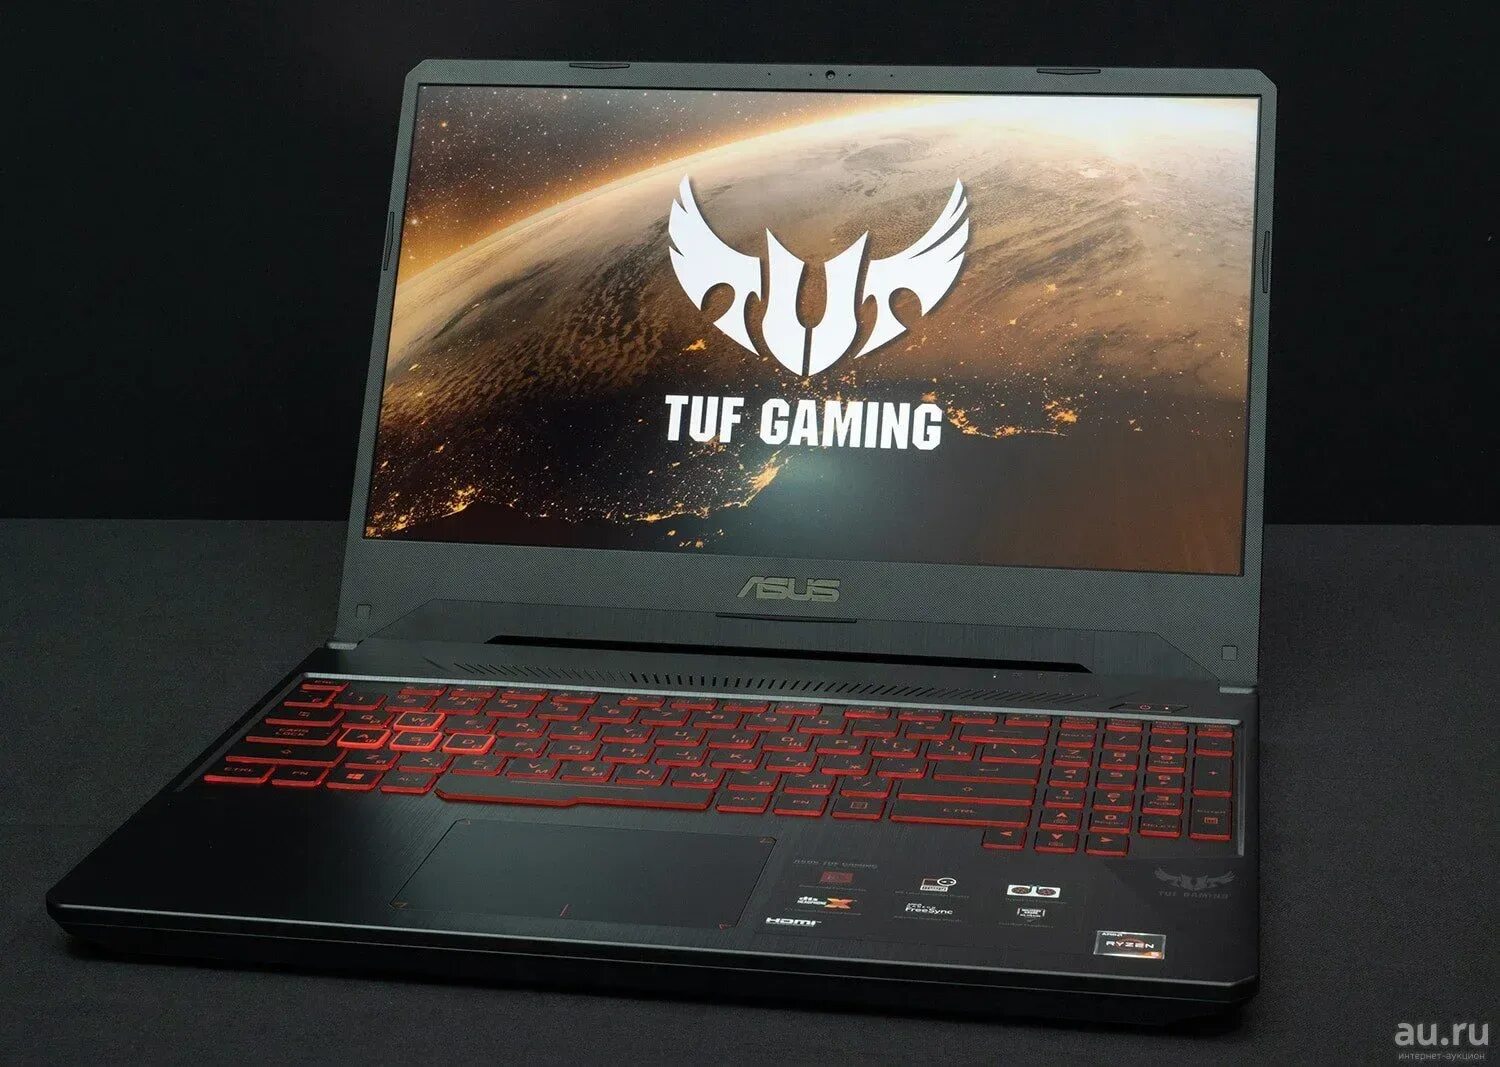 Asus gaming fx505d. ASUS fx505dy. ASUS TUF fx505dy. ASUS TUF Gaming 505dy. ASUS TUF Gaming fx505dy-bq001.